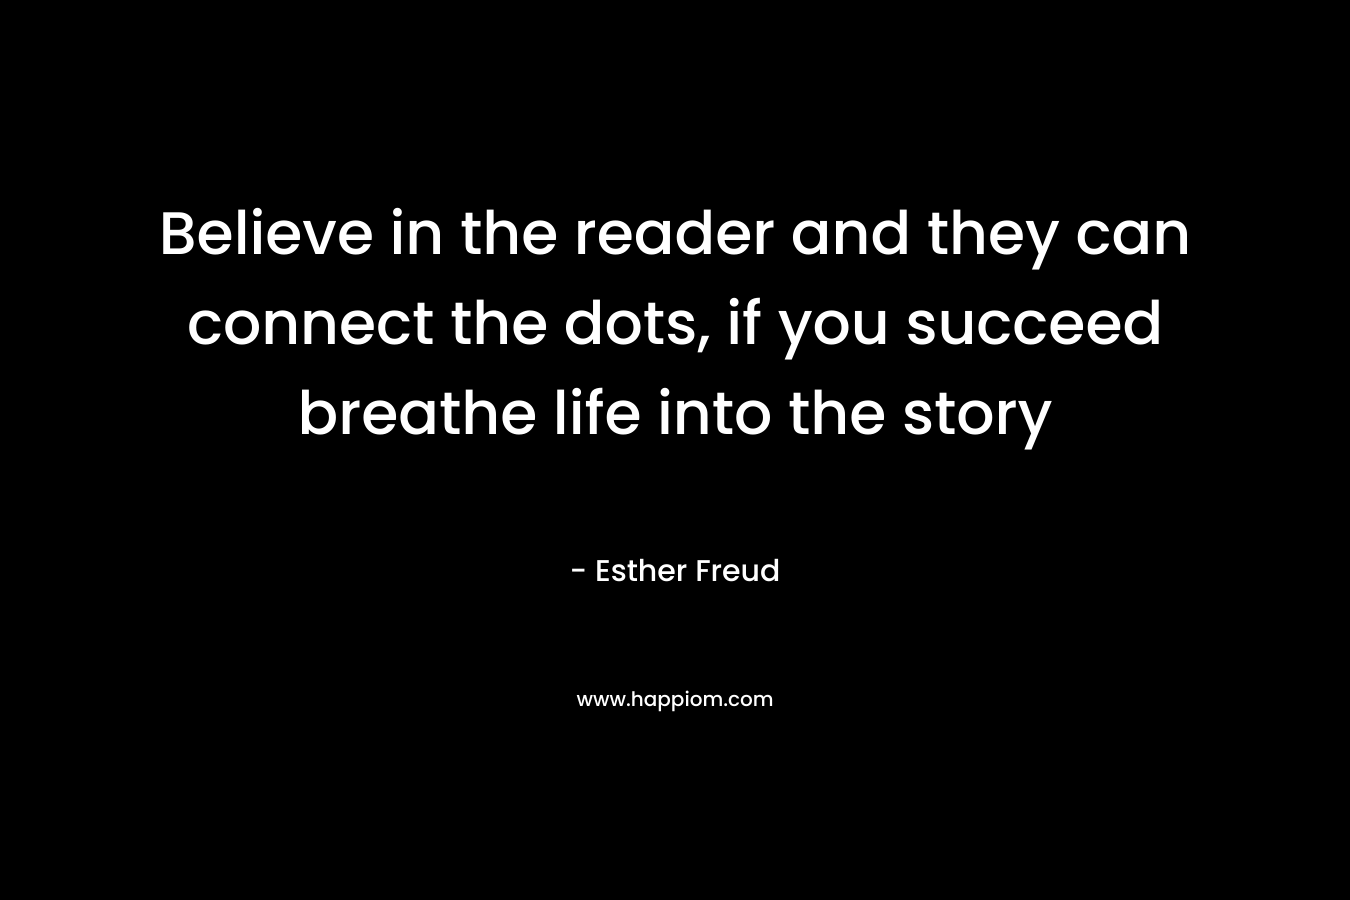 Believe in the reader and they can connect the dots, if you succeed breathe life into the story – Esther Freud